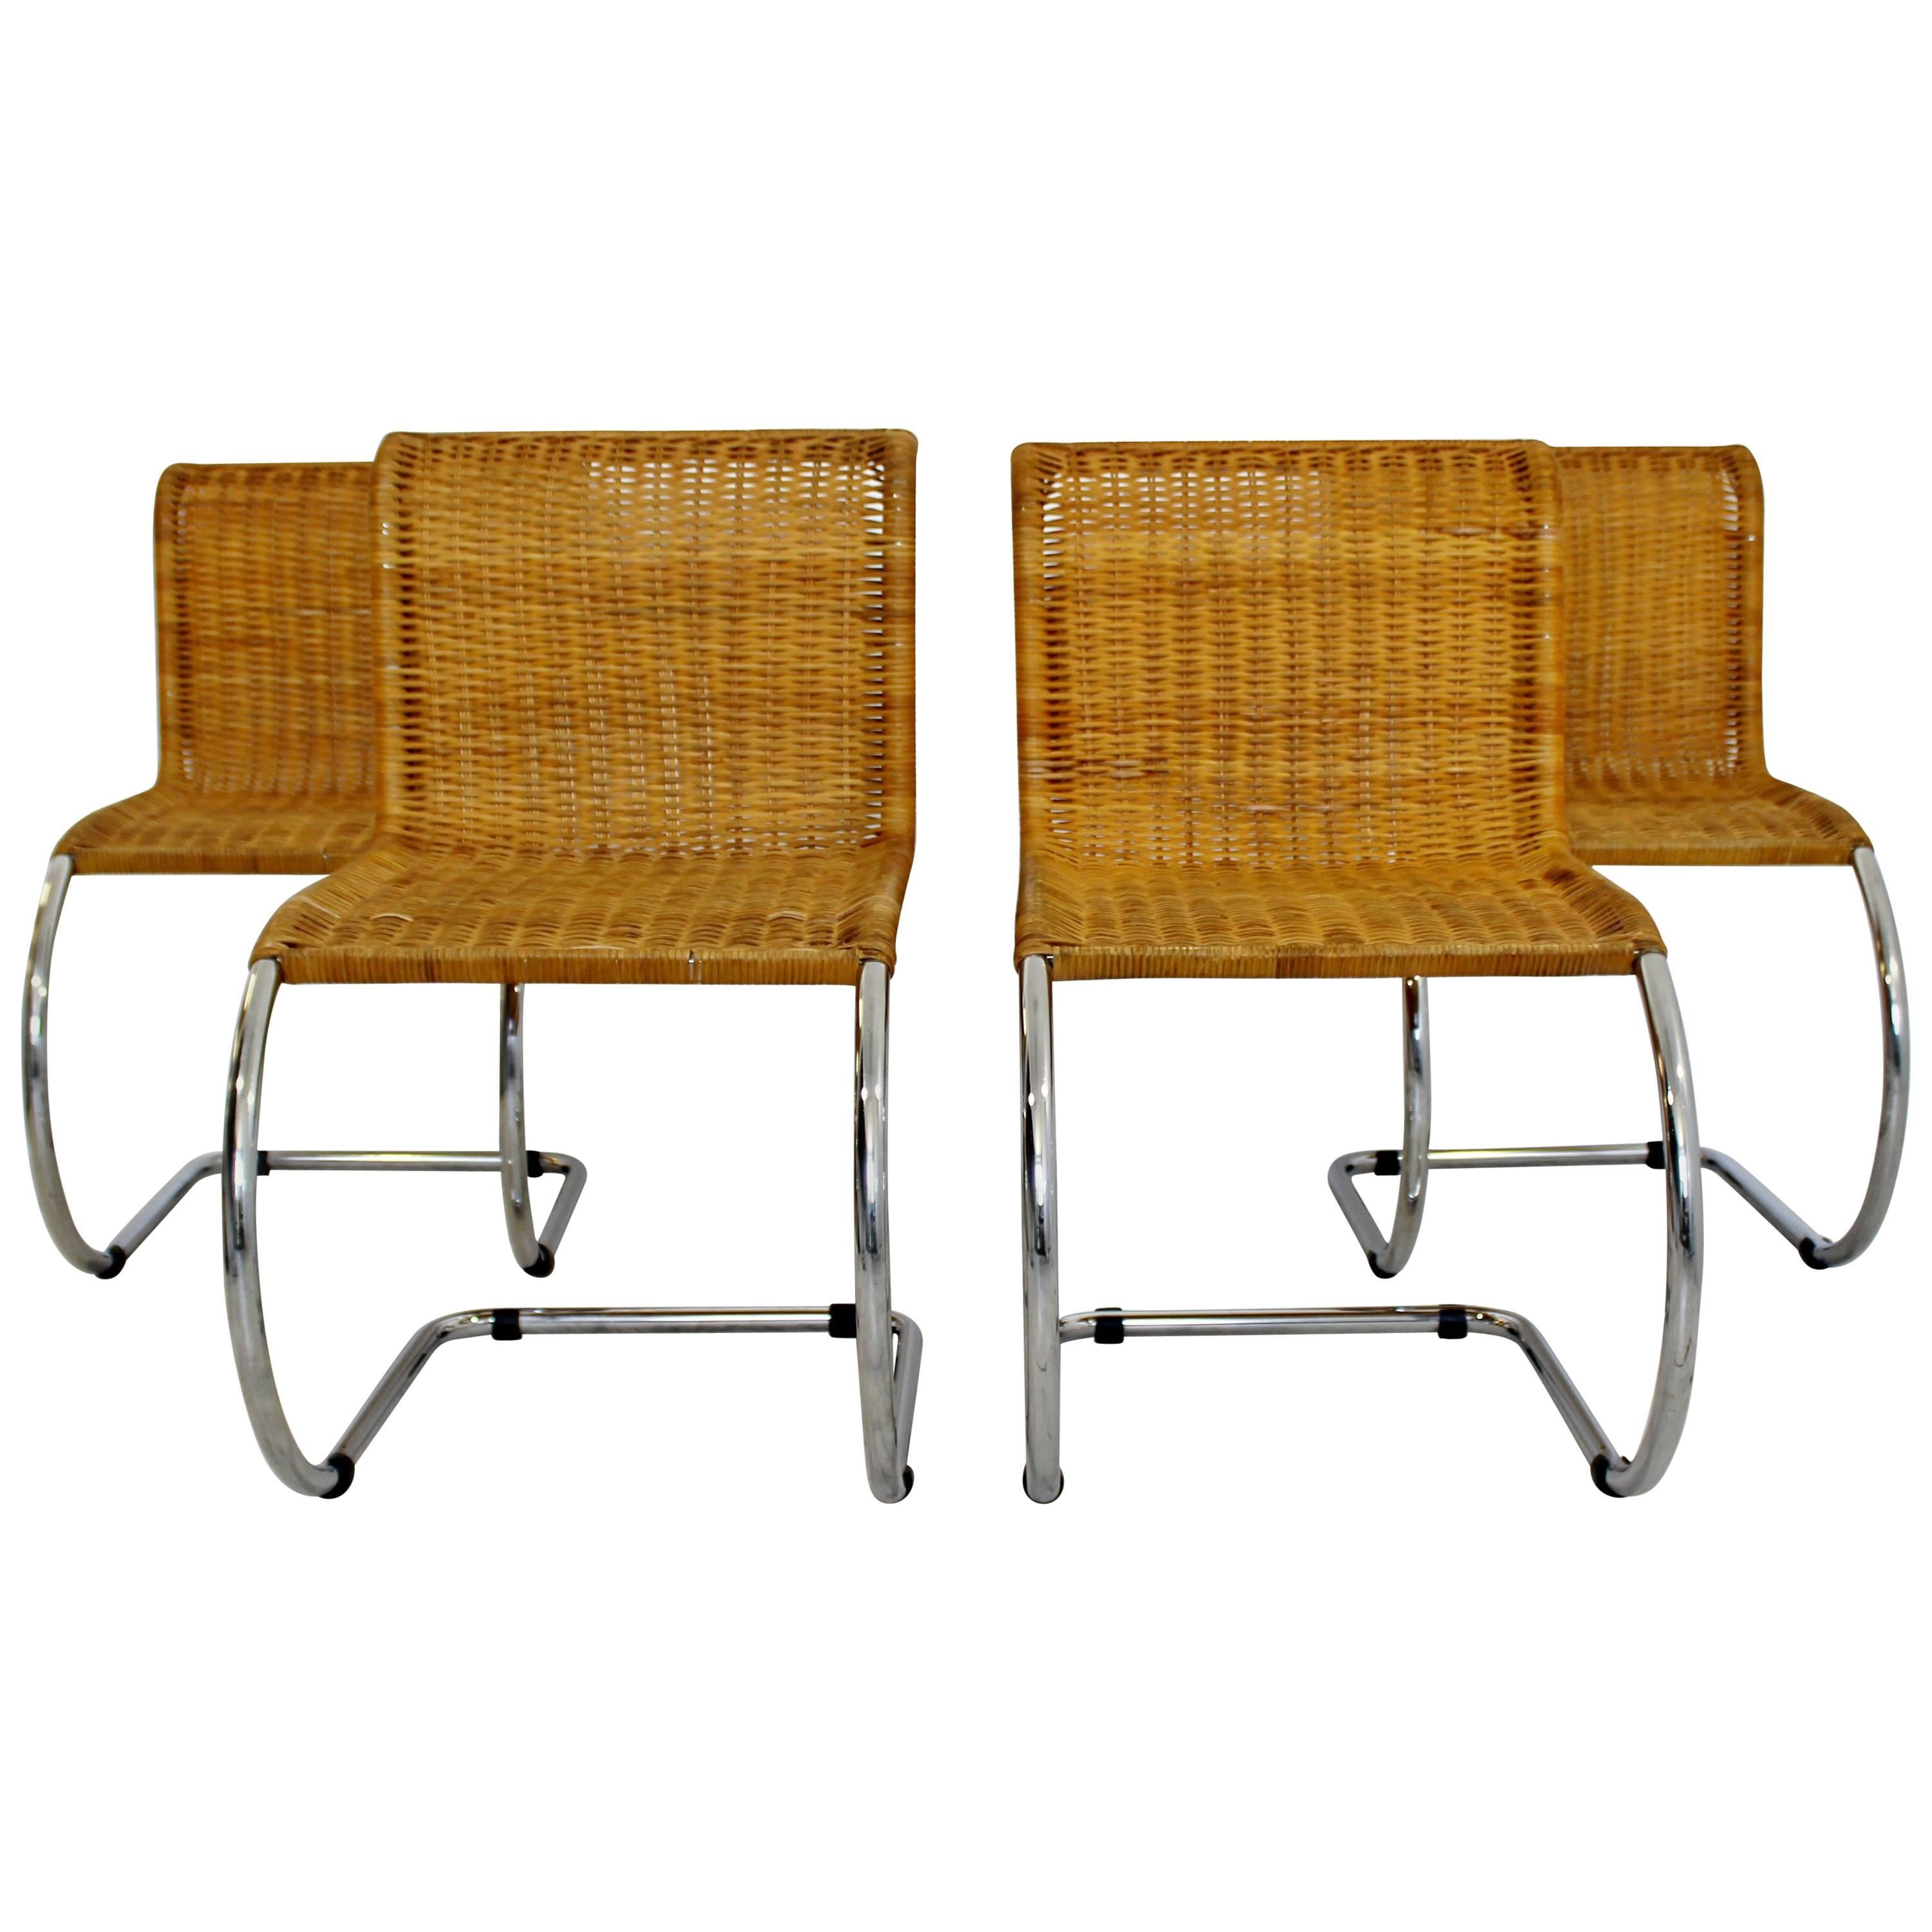 Mid-Century Modern Mies van der Rohe Set of Four Cantilever Wicker Chrome Chairs